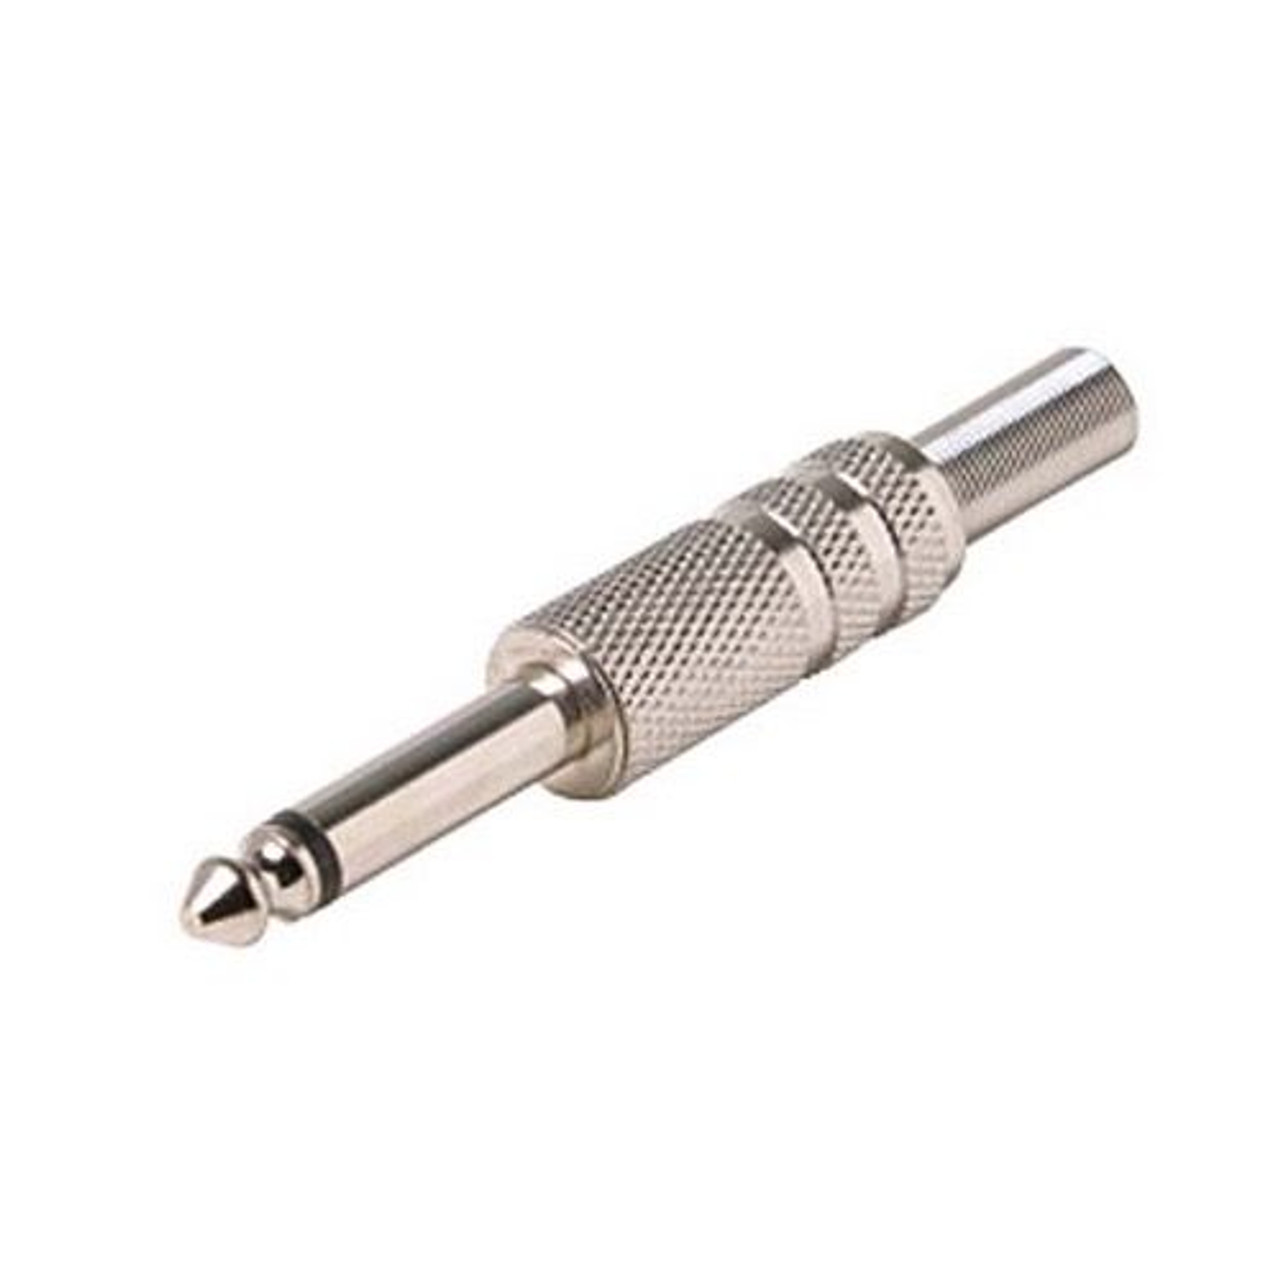 Eagle 1/4" Plug Connector Mono Audio Phono Male 6.3mm Nickel Plate Cable Mount Audio Male Connector with Spring Relief Sleeve Jack Plug Connector Solder Type